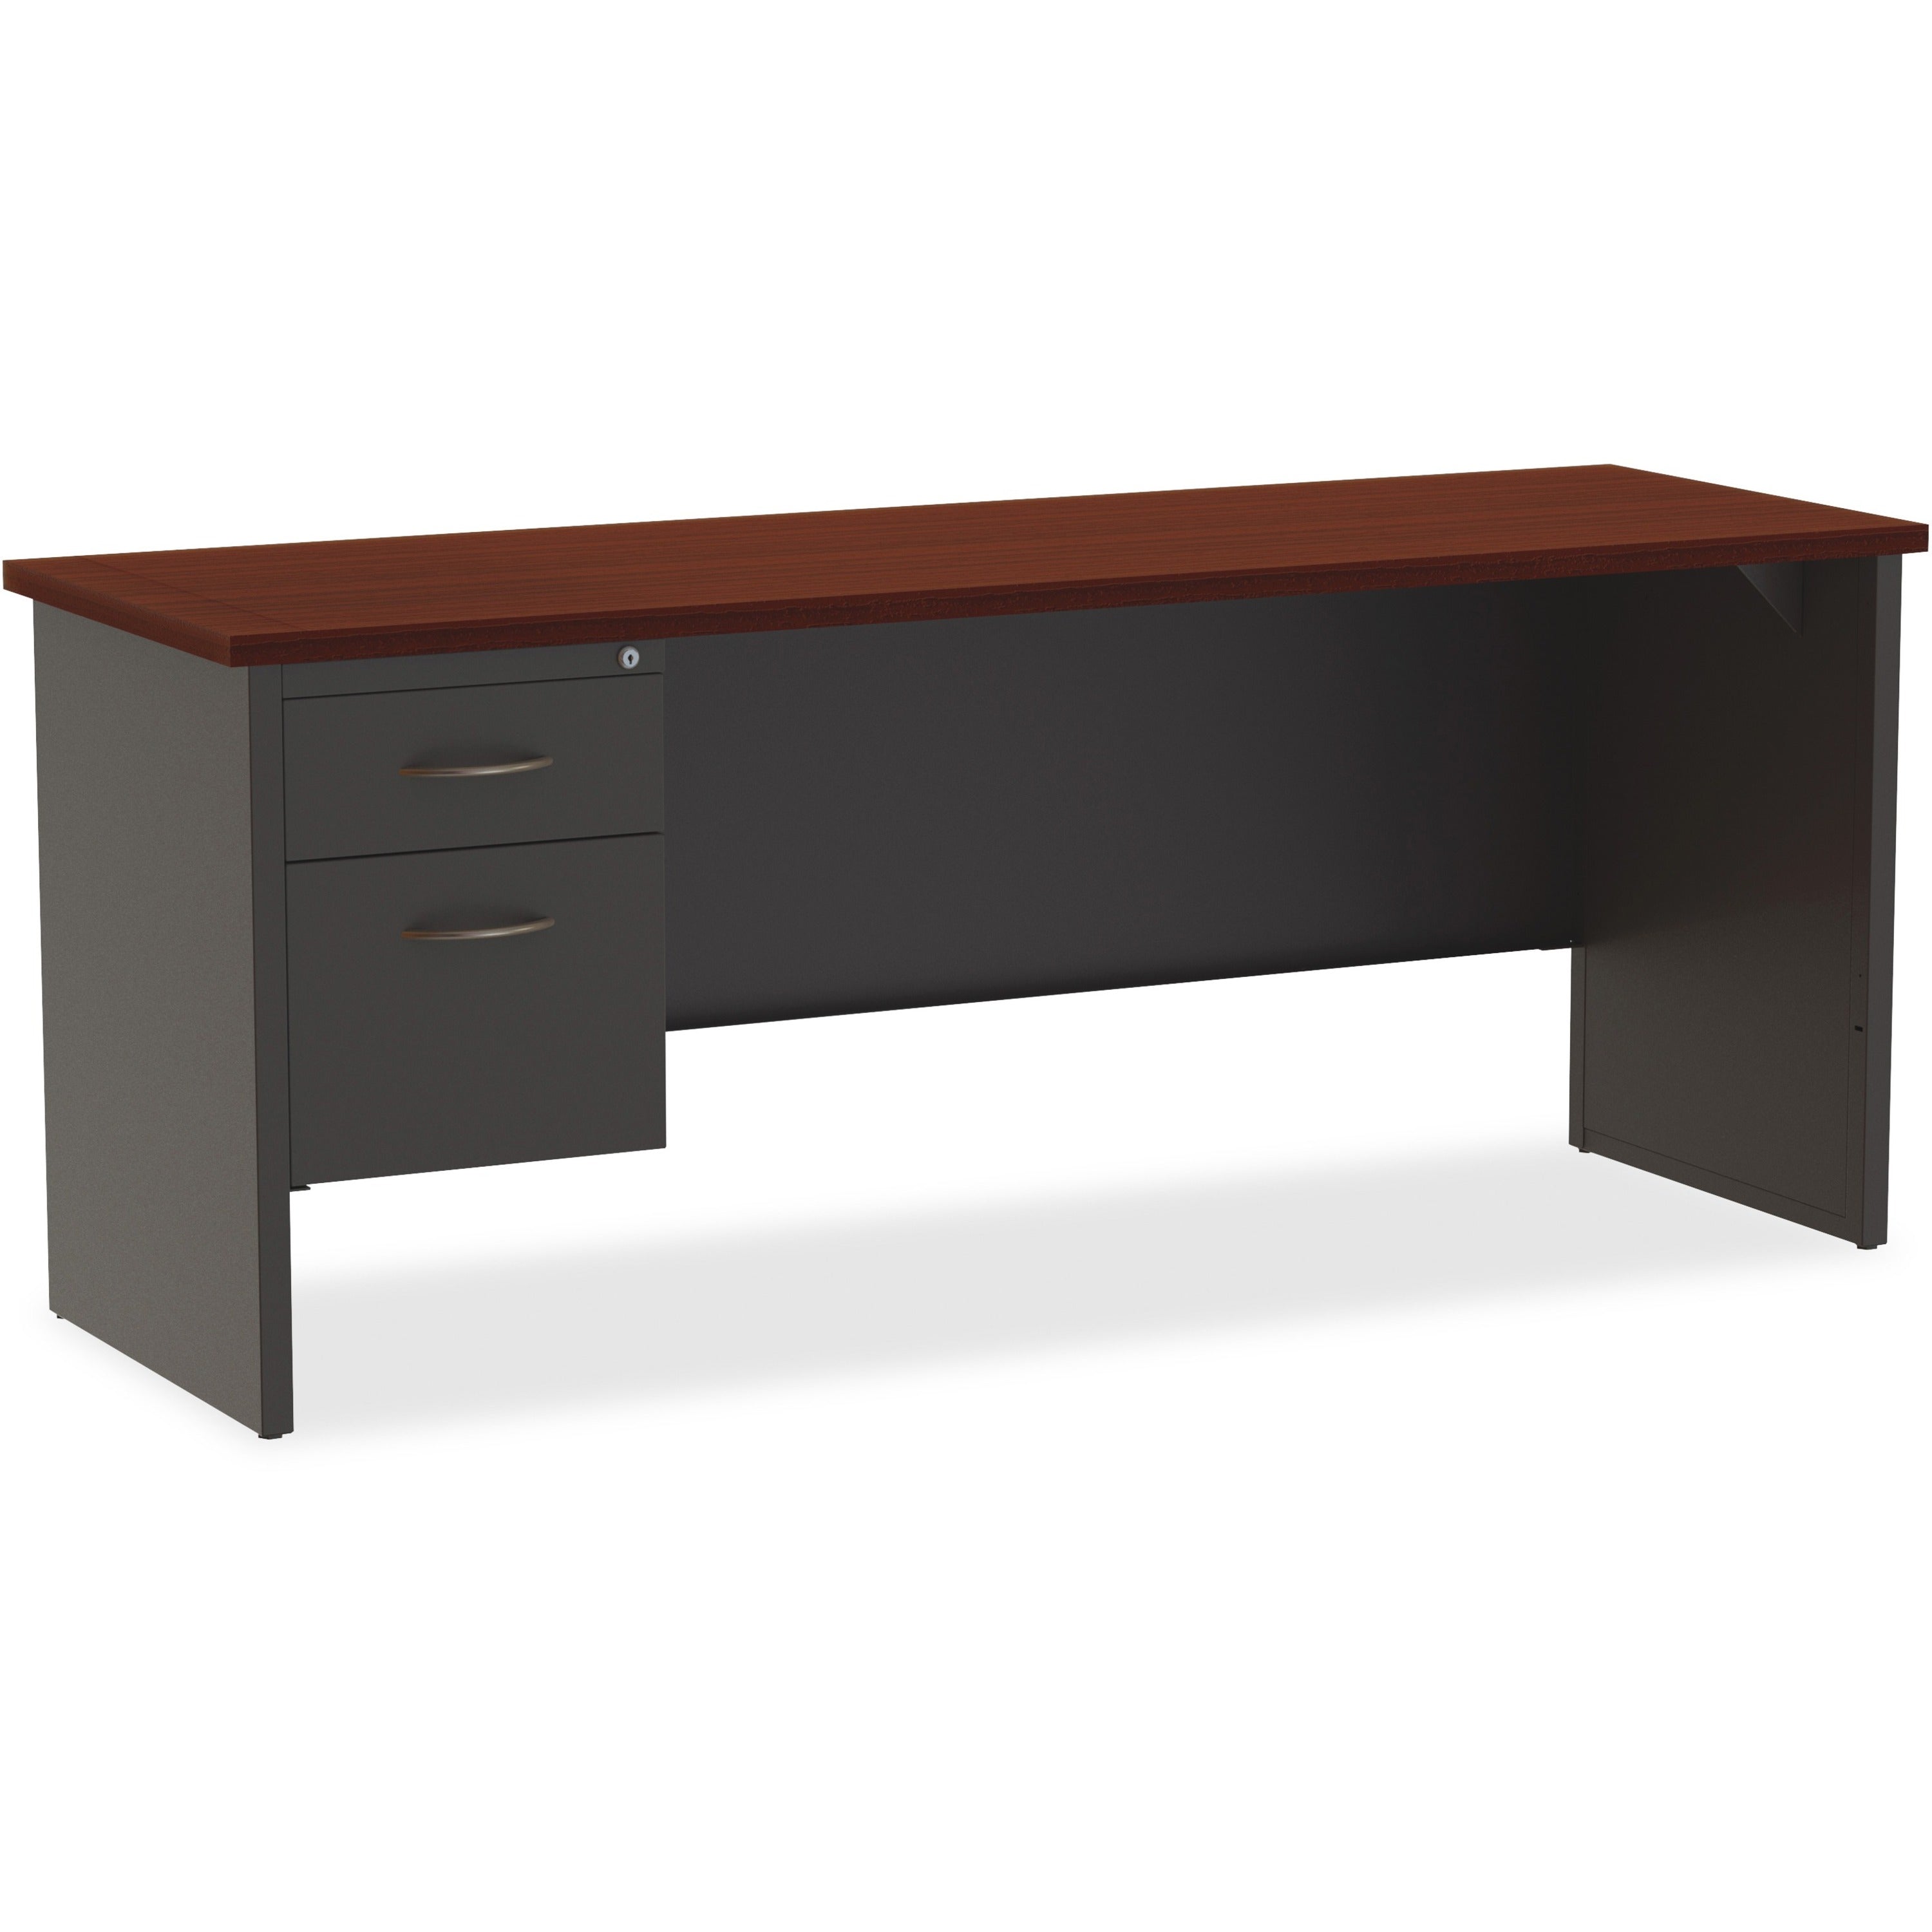 Lorell Fortress Modular Series Left-pedestal Credenza - 72" x 24" , 1.1" Top - 2 x Box, File Drawer(s) - Single Pedestal on Left Side - Material: Steel - Finish: Mahogany Laminate, Charcoal - Scratch Resistant, Stain Resistant, Ball-bearing Suspensio - 